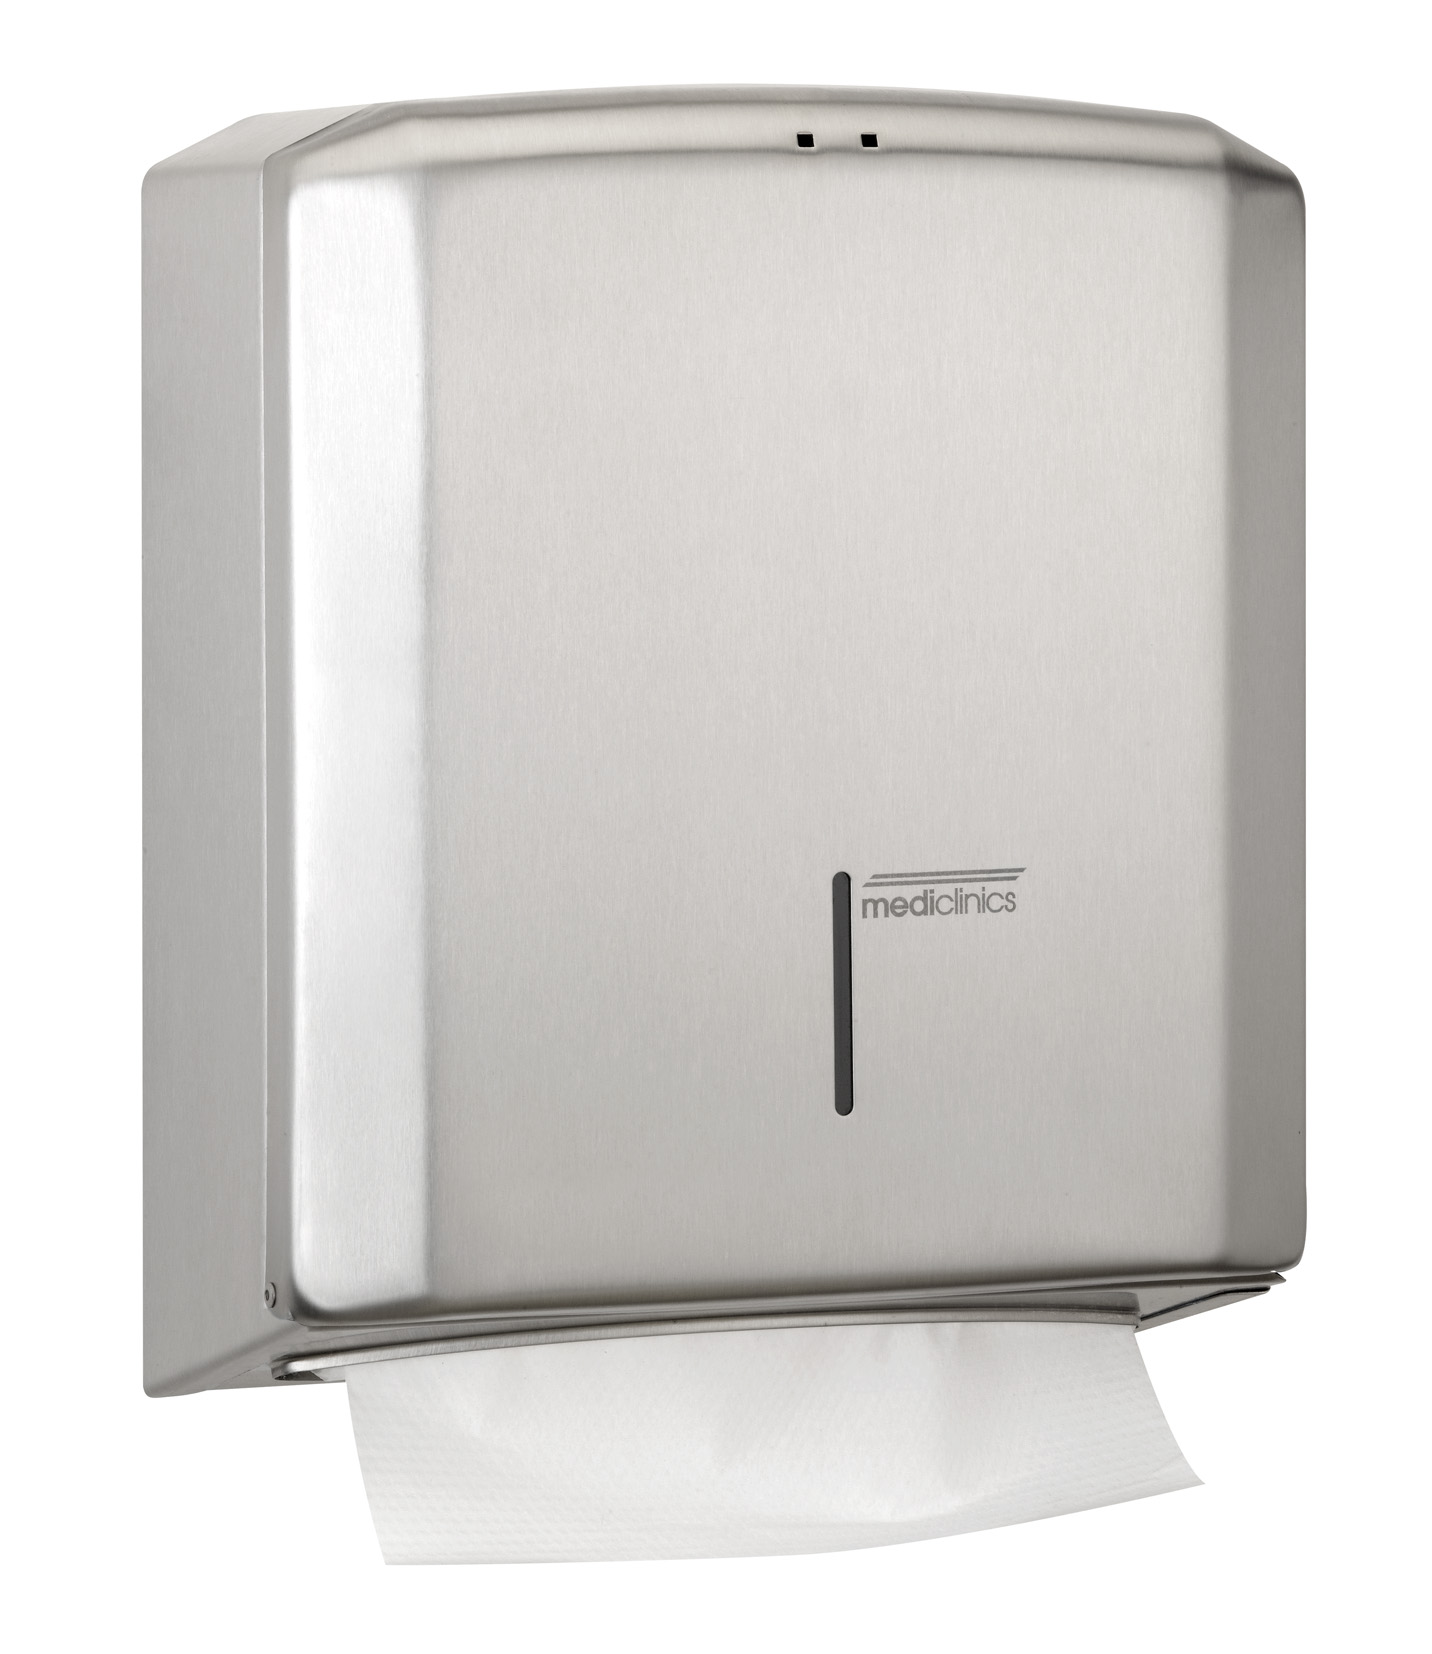 Tissue Dispenser Stainless Steel - Get the information you need now.